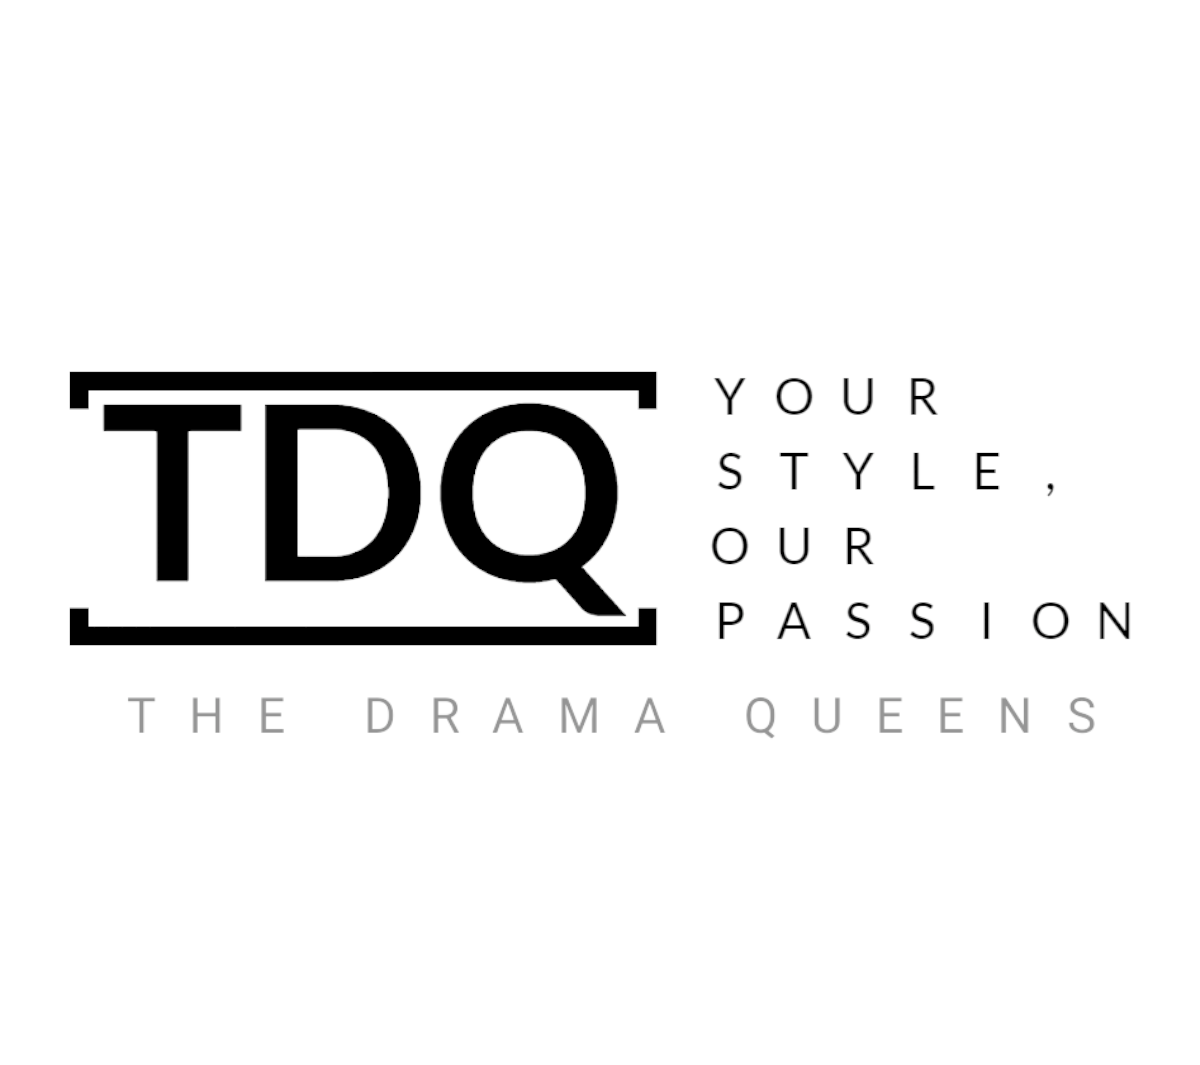 The Drama Queens – The Drama Queens